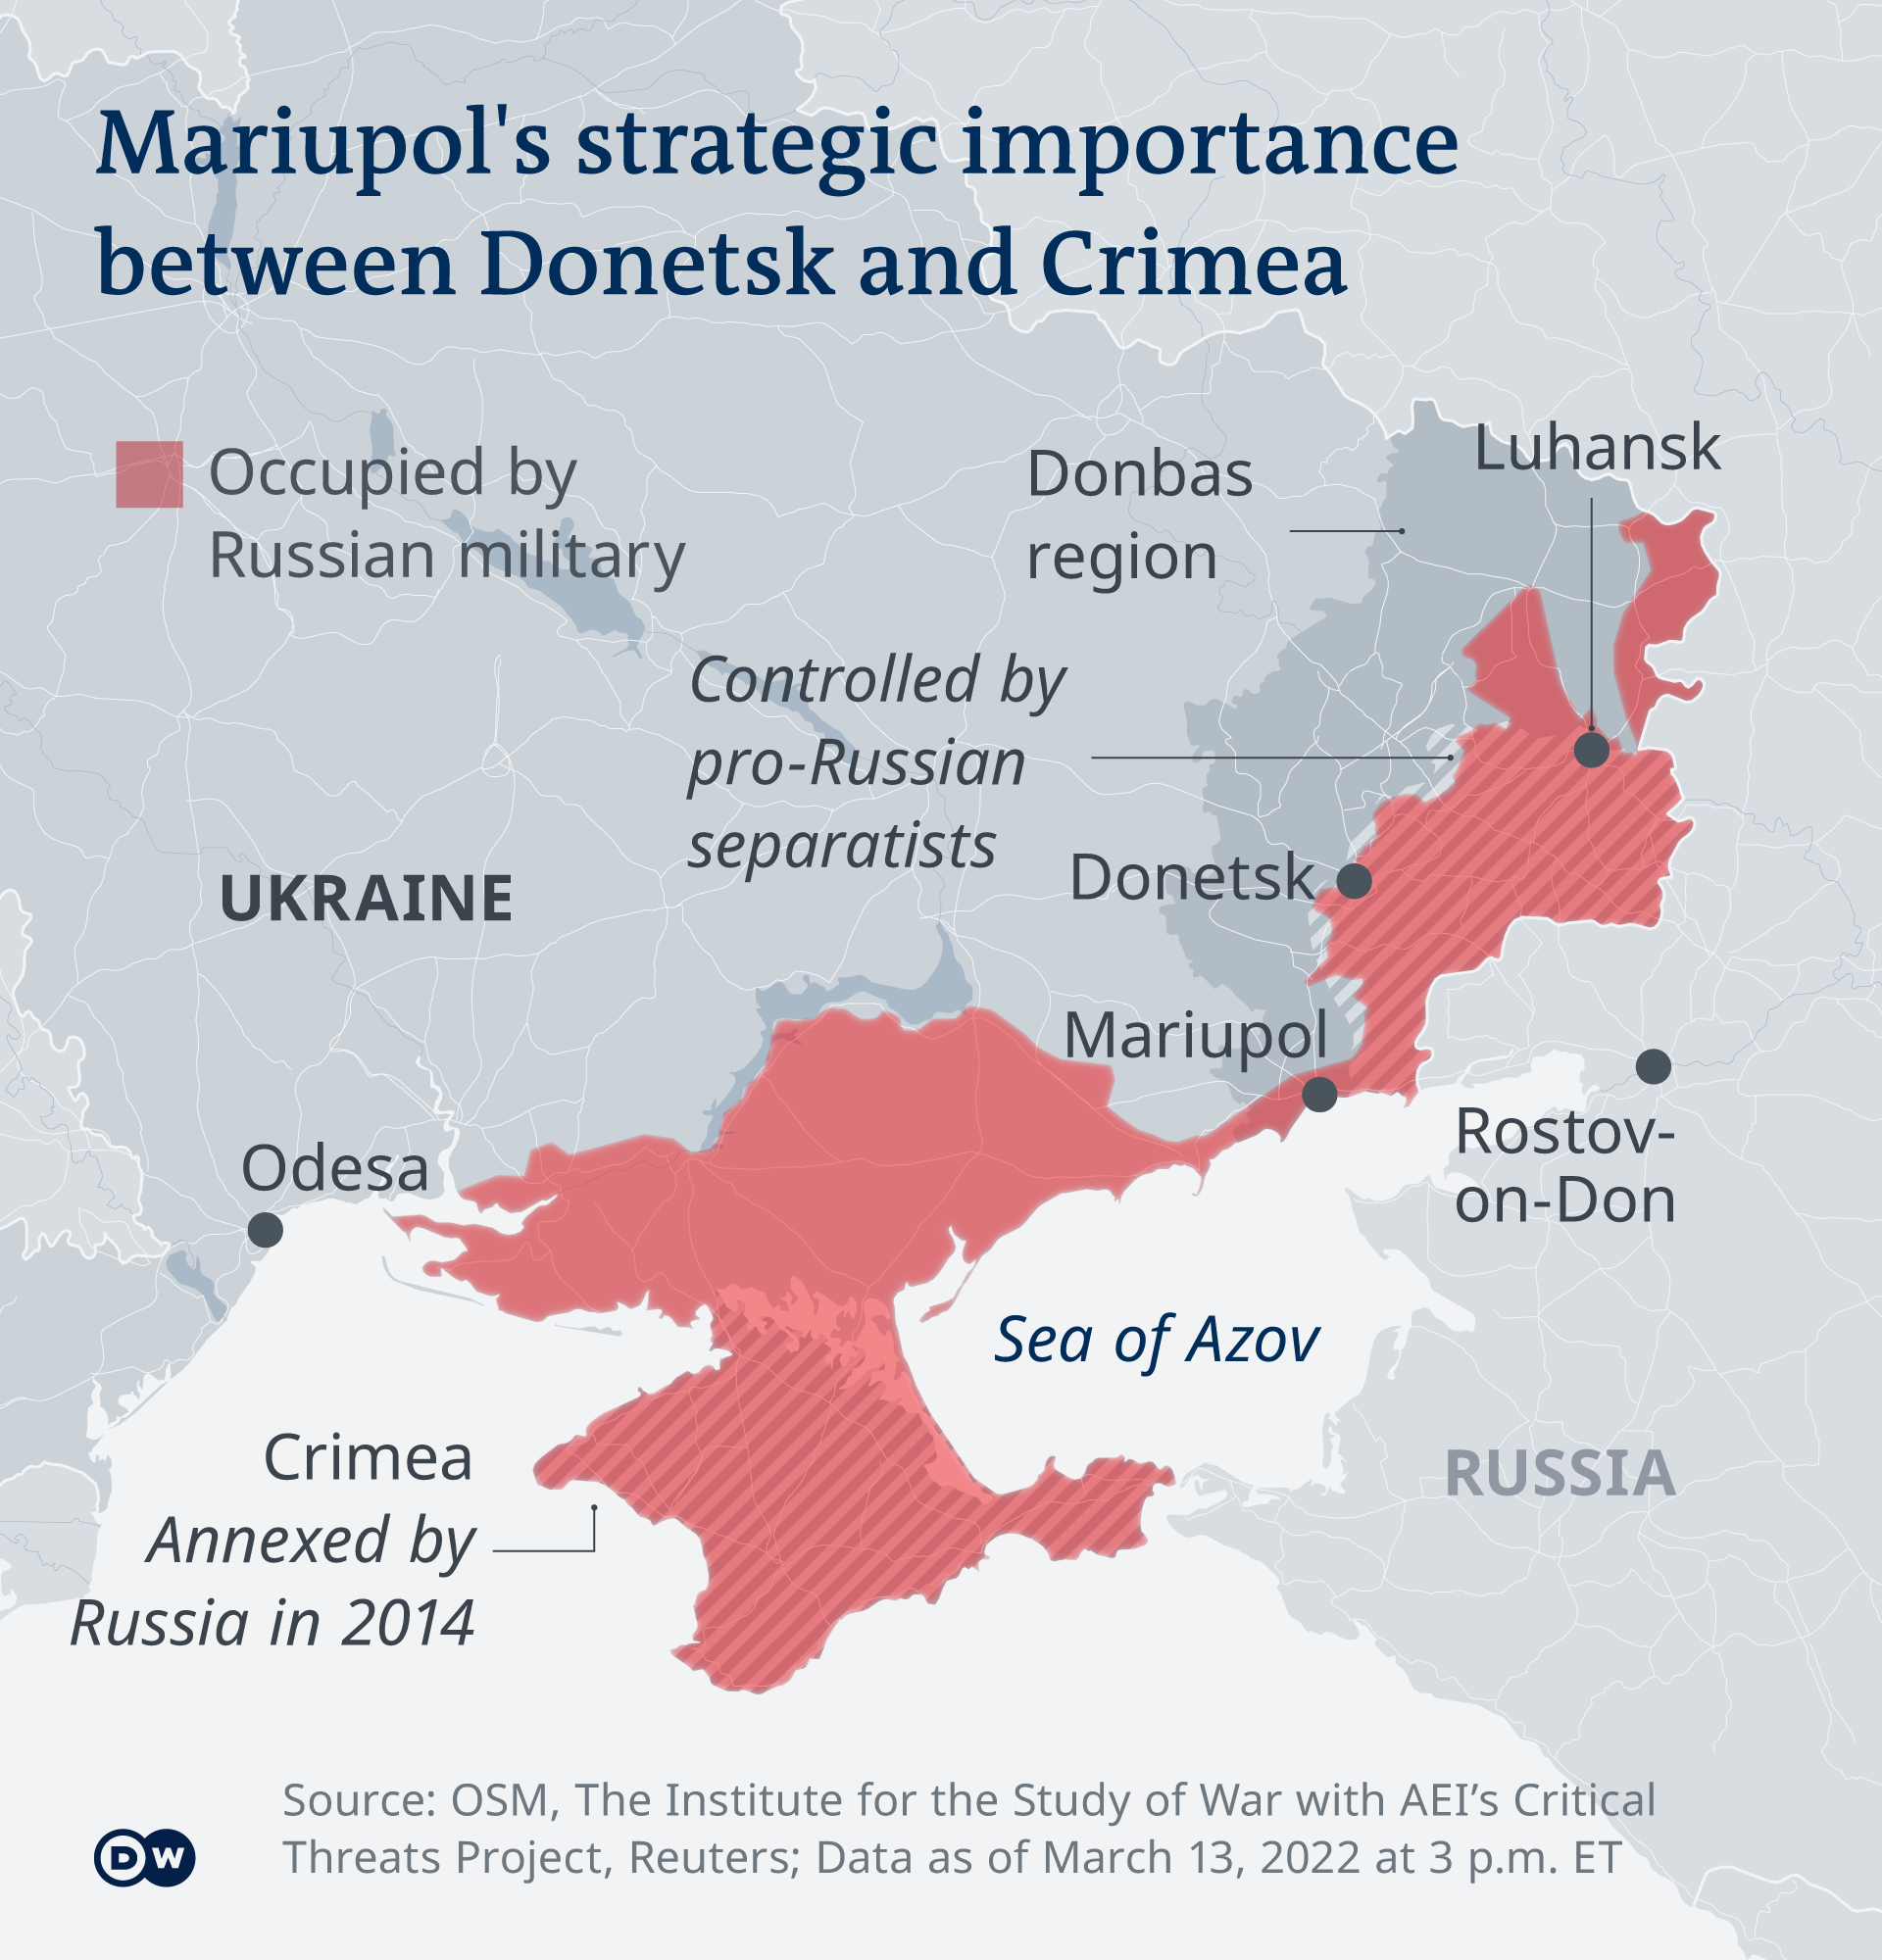 A map of Mariupol and surroundings